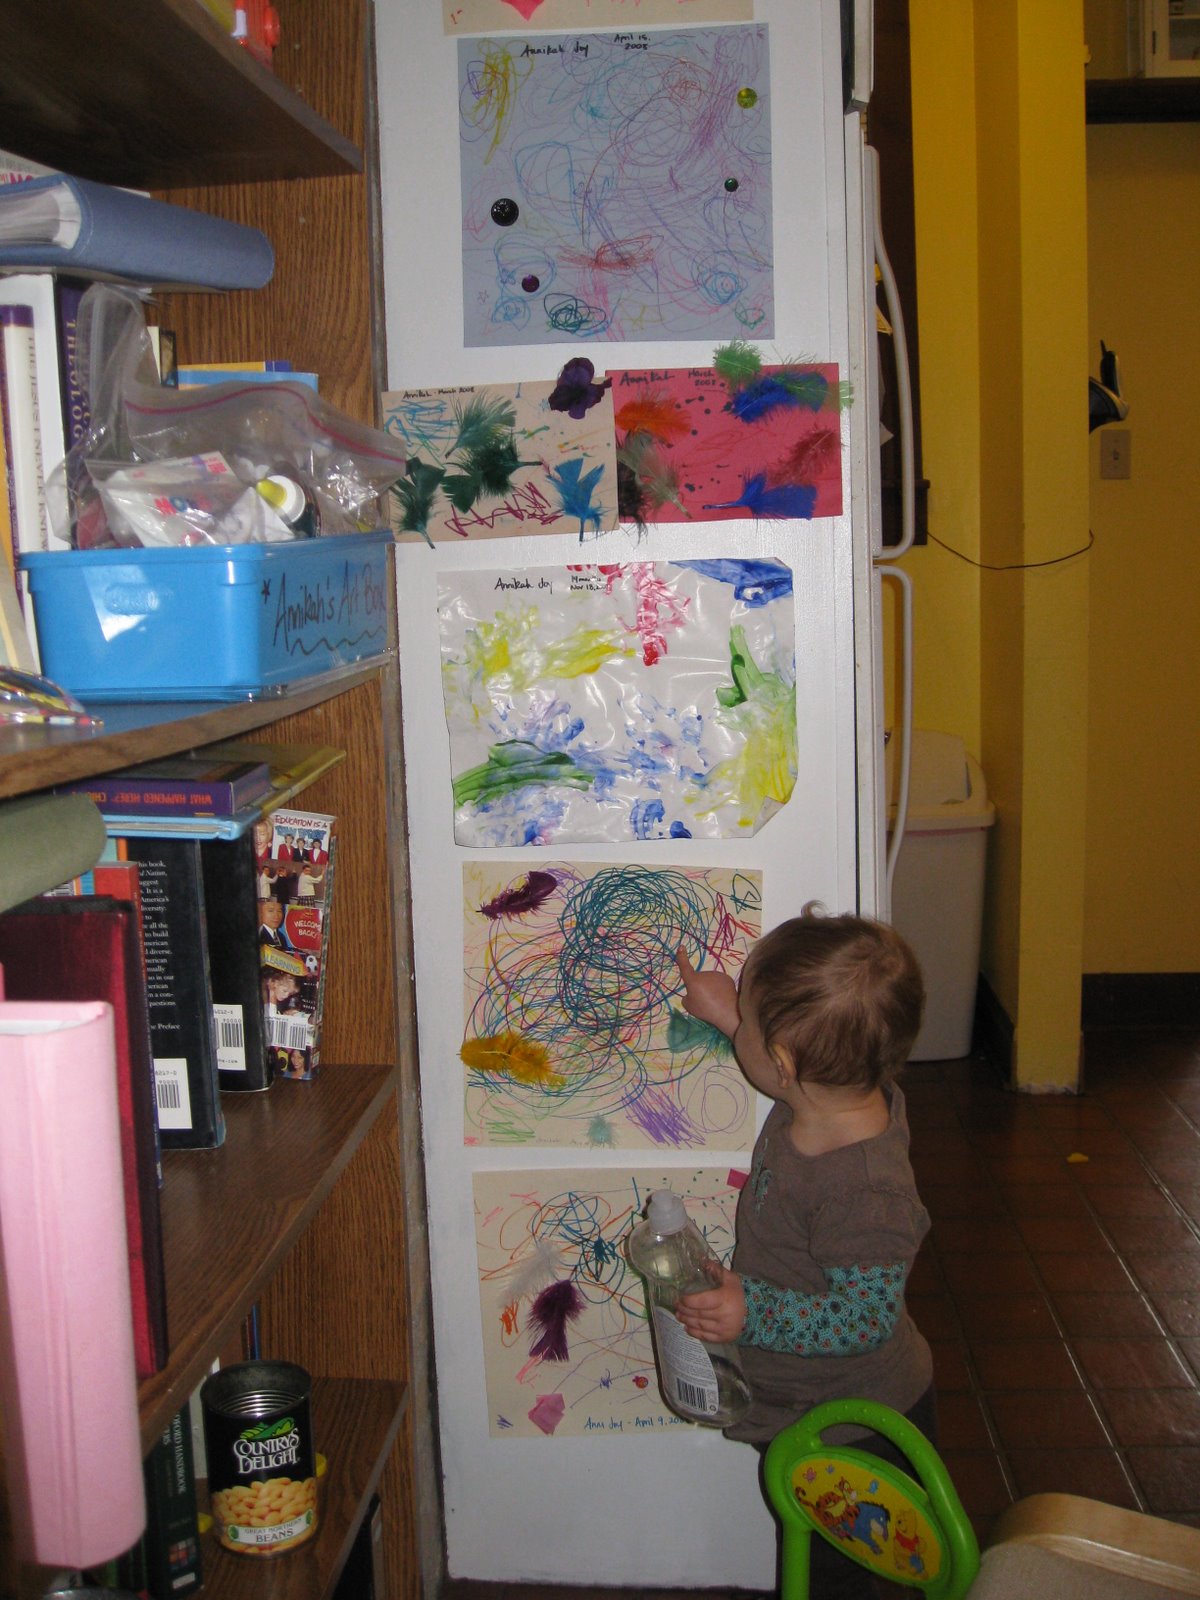 [art+work+and+baby+in+potty+002.JPG]